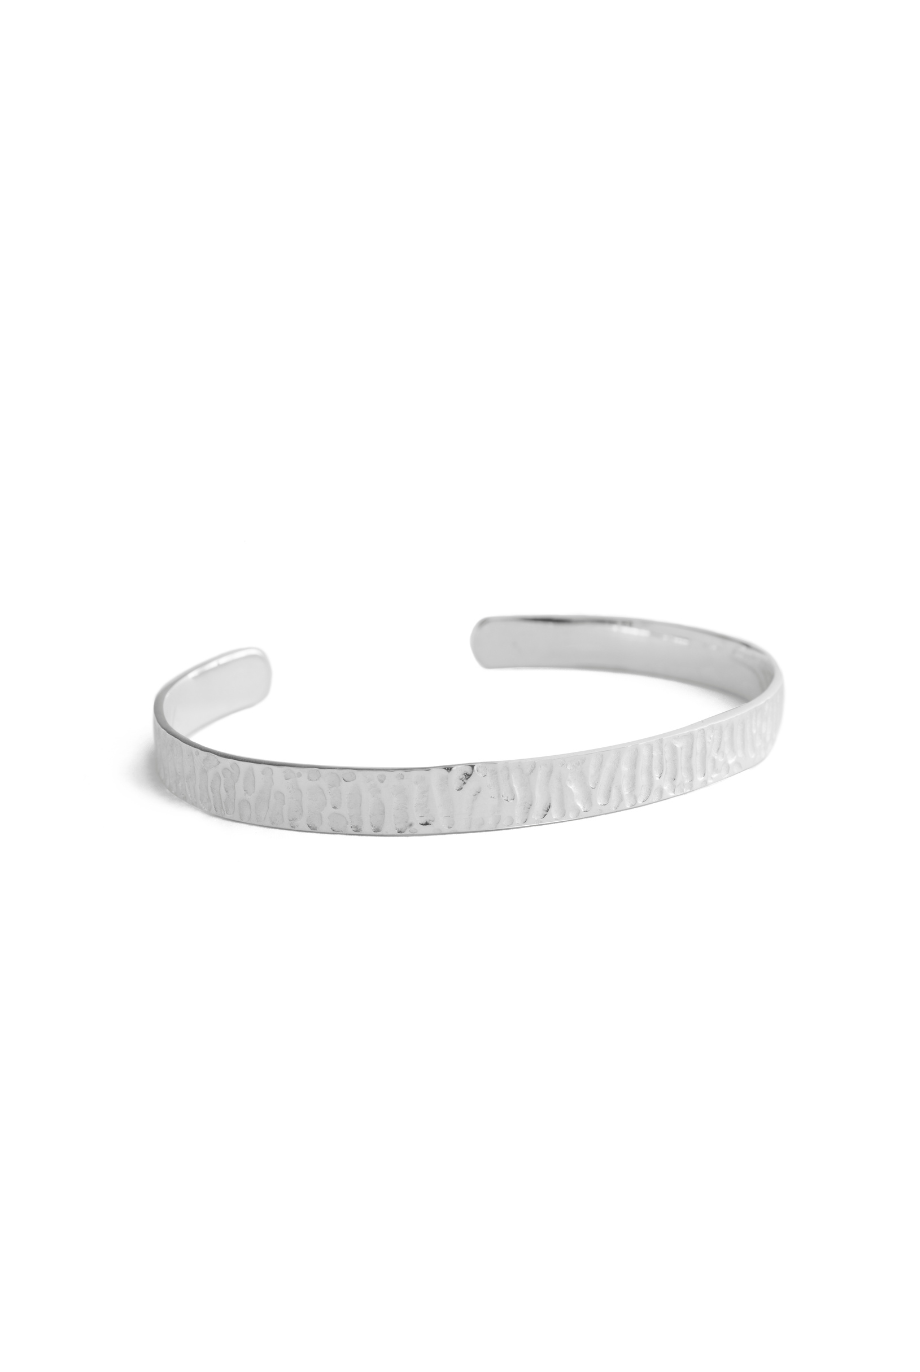 Foundation Textured Bangle Silver